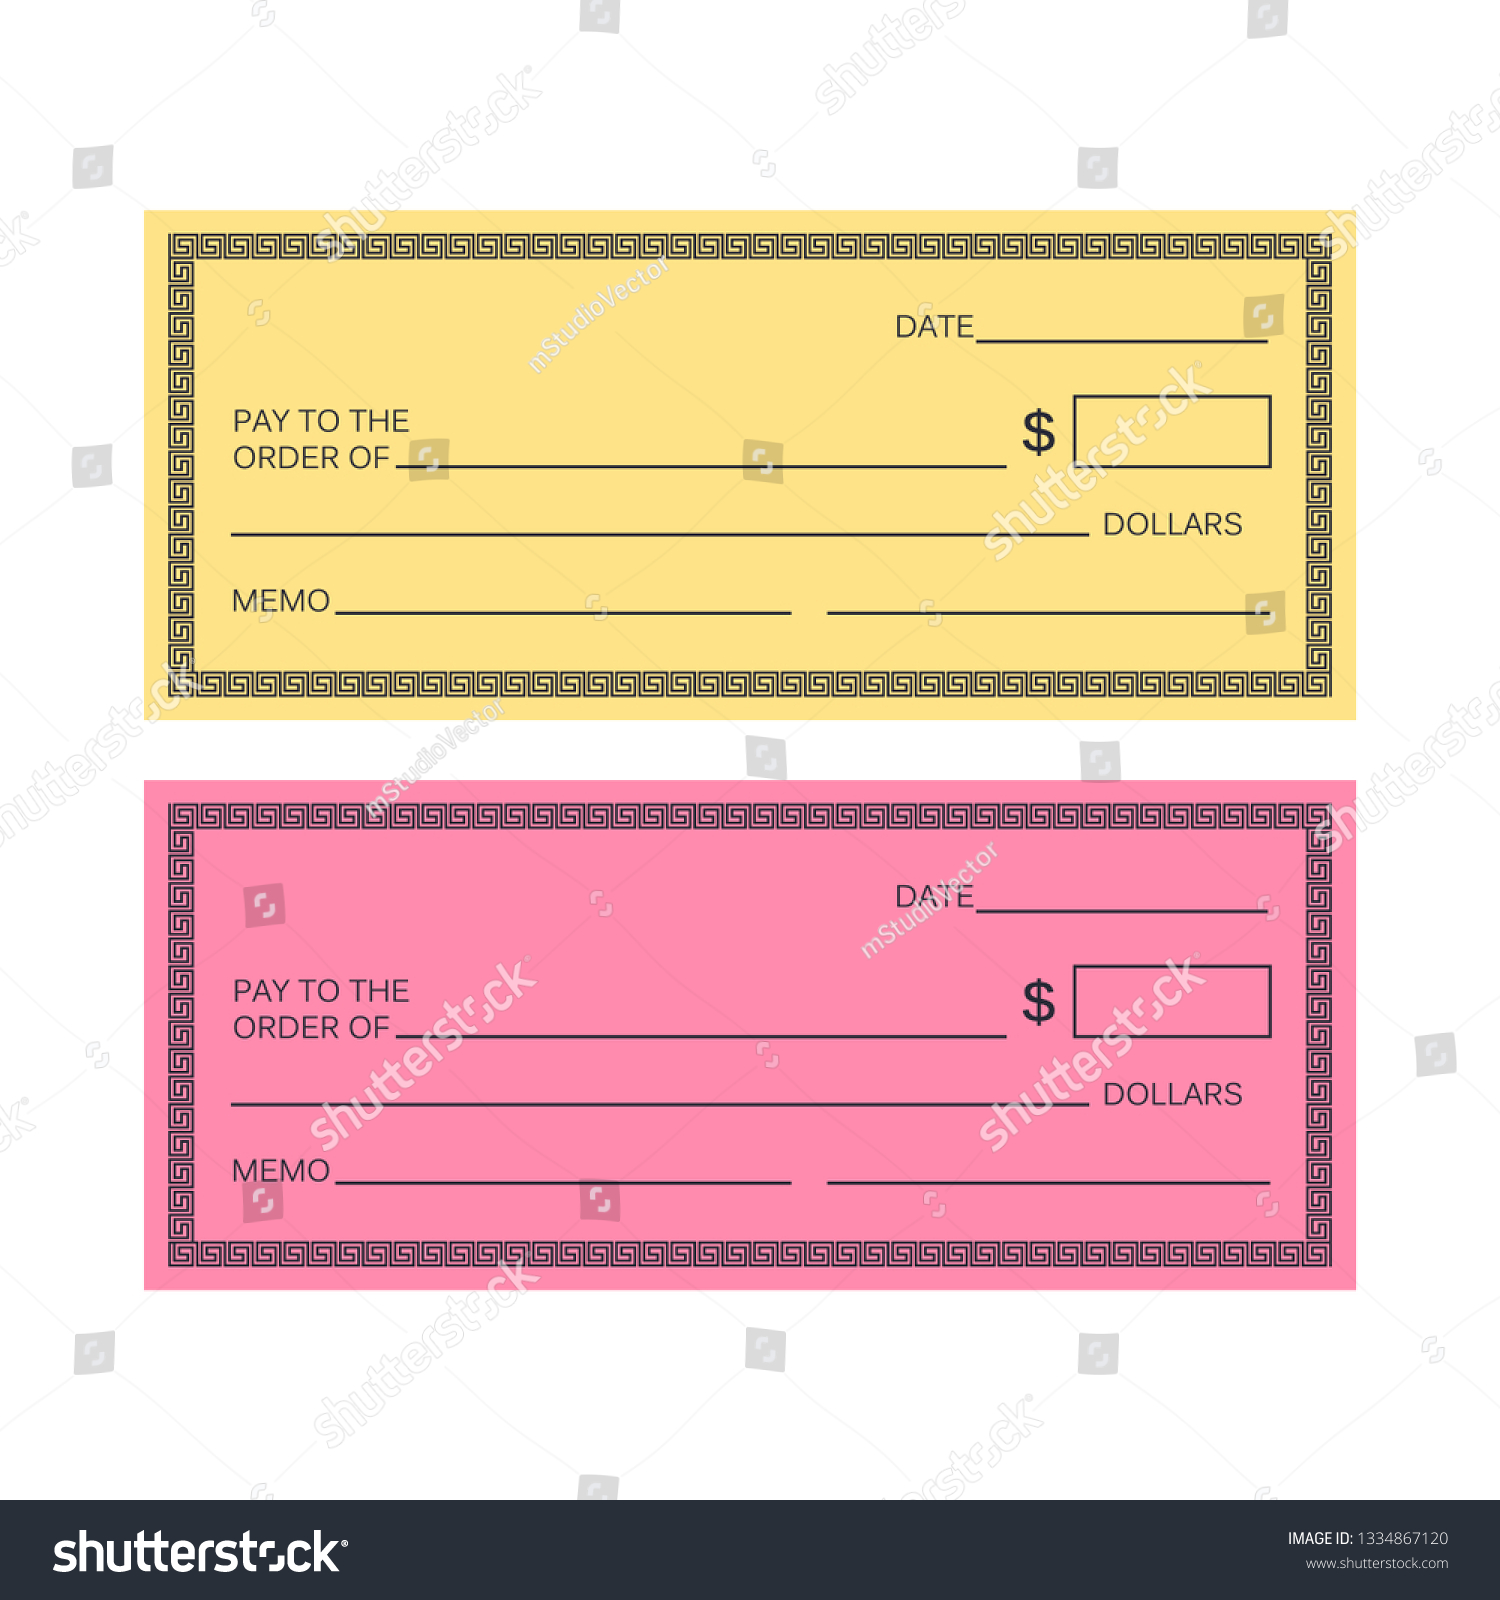 Blank check template. Check template. Banking check template #1334867120